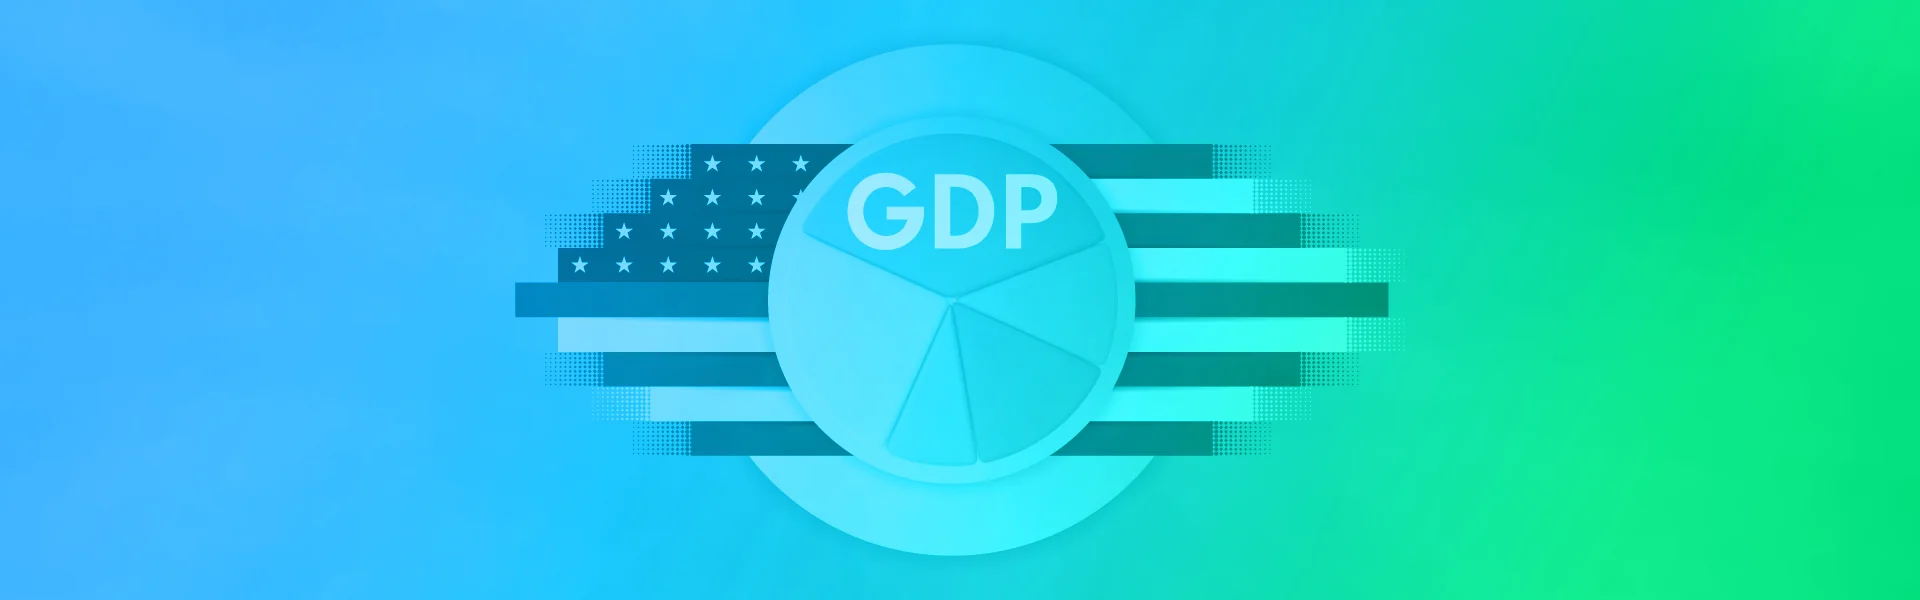 financial-event-us-gross-domestic-product-(GDP)